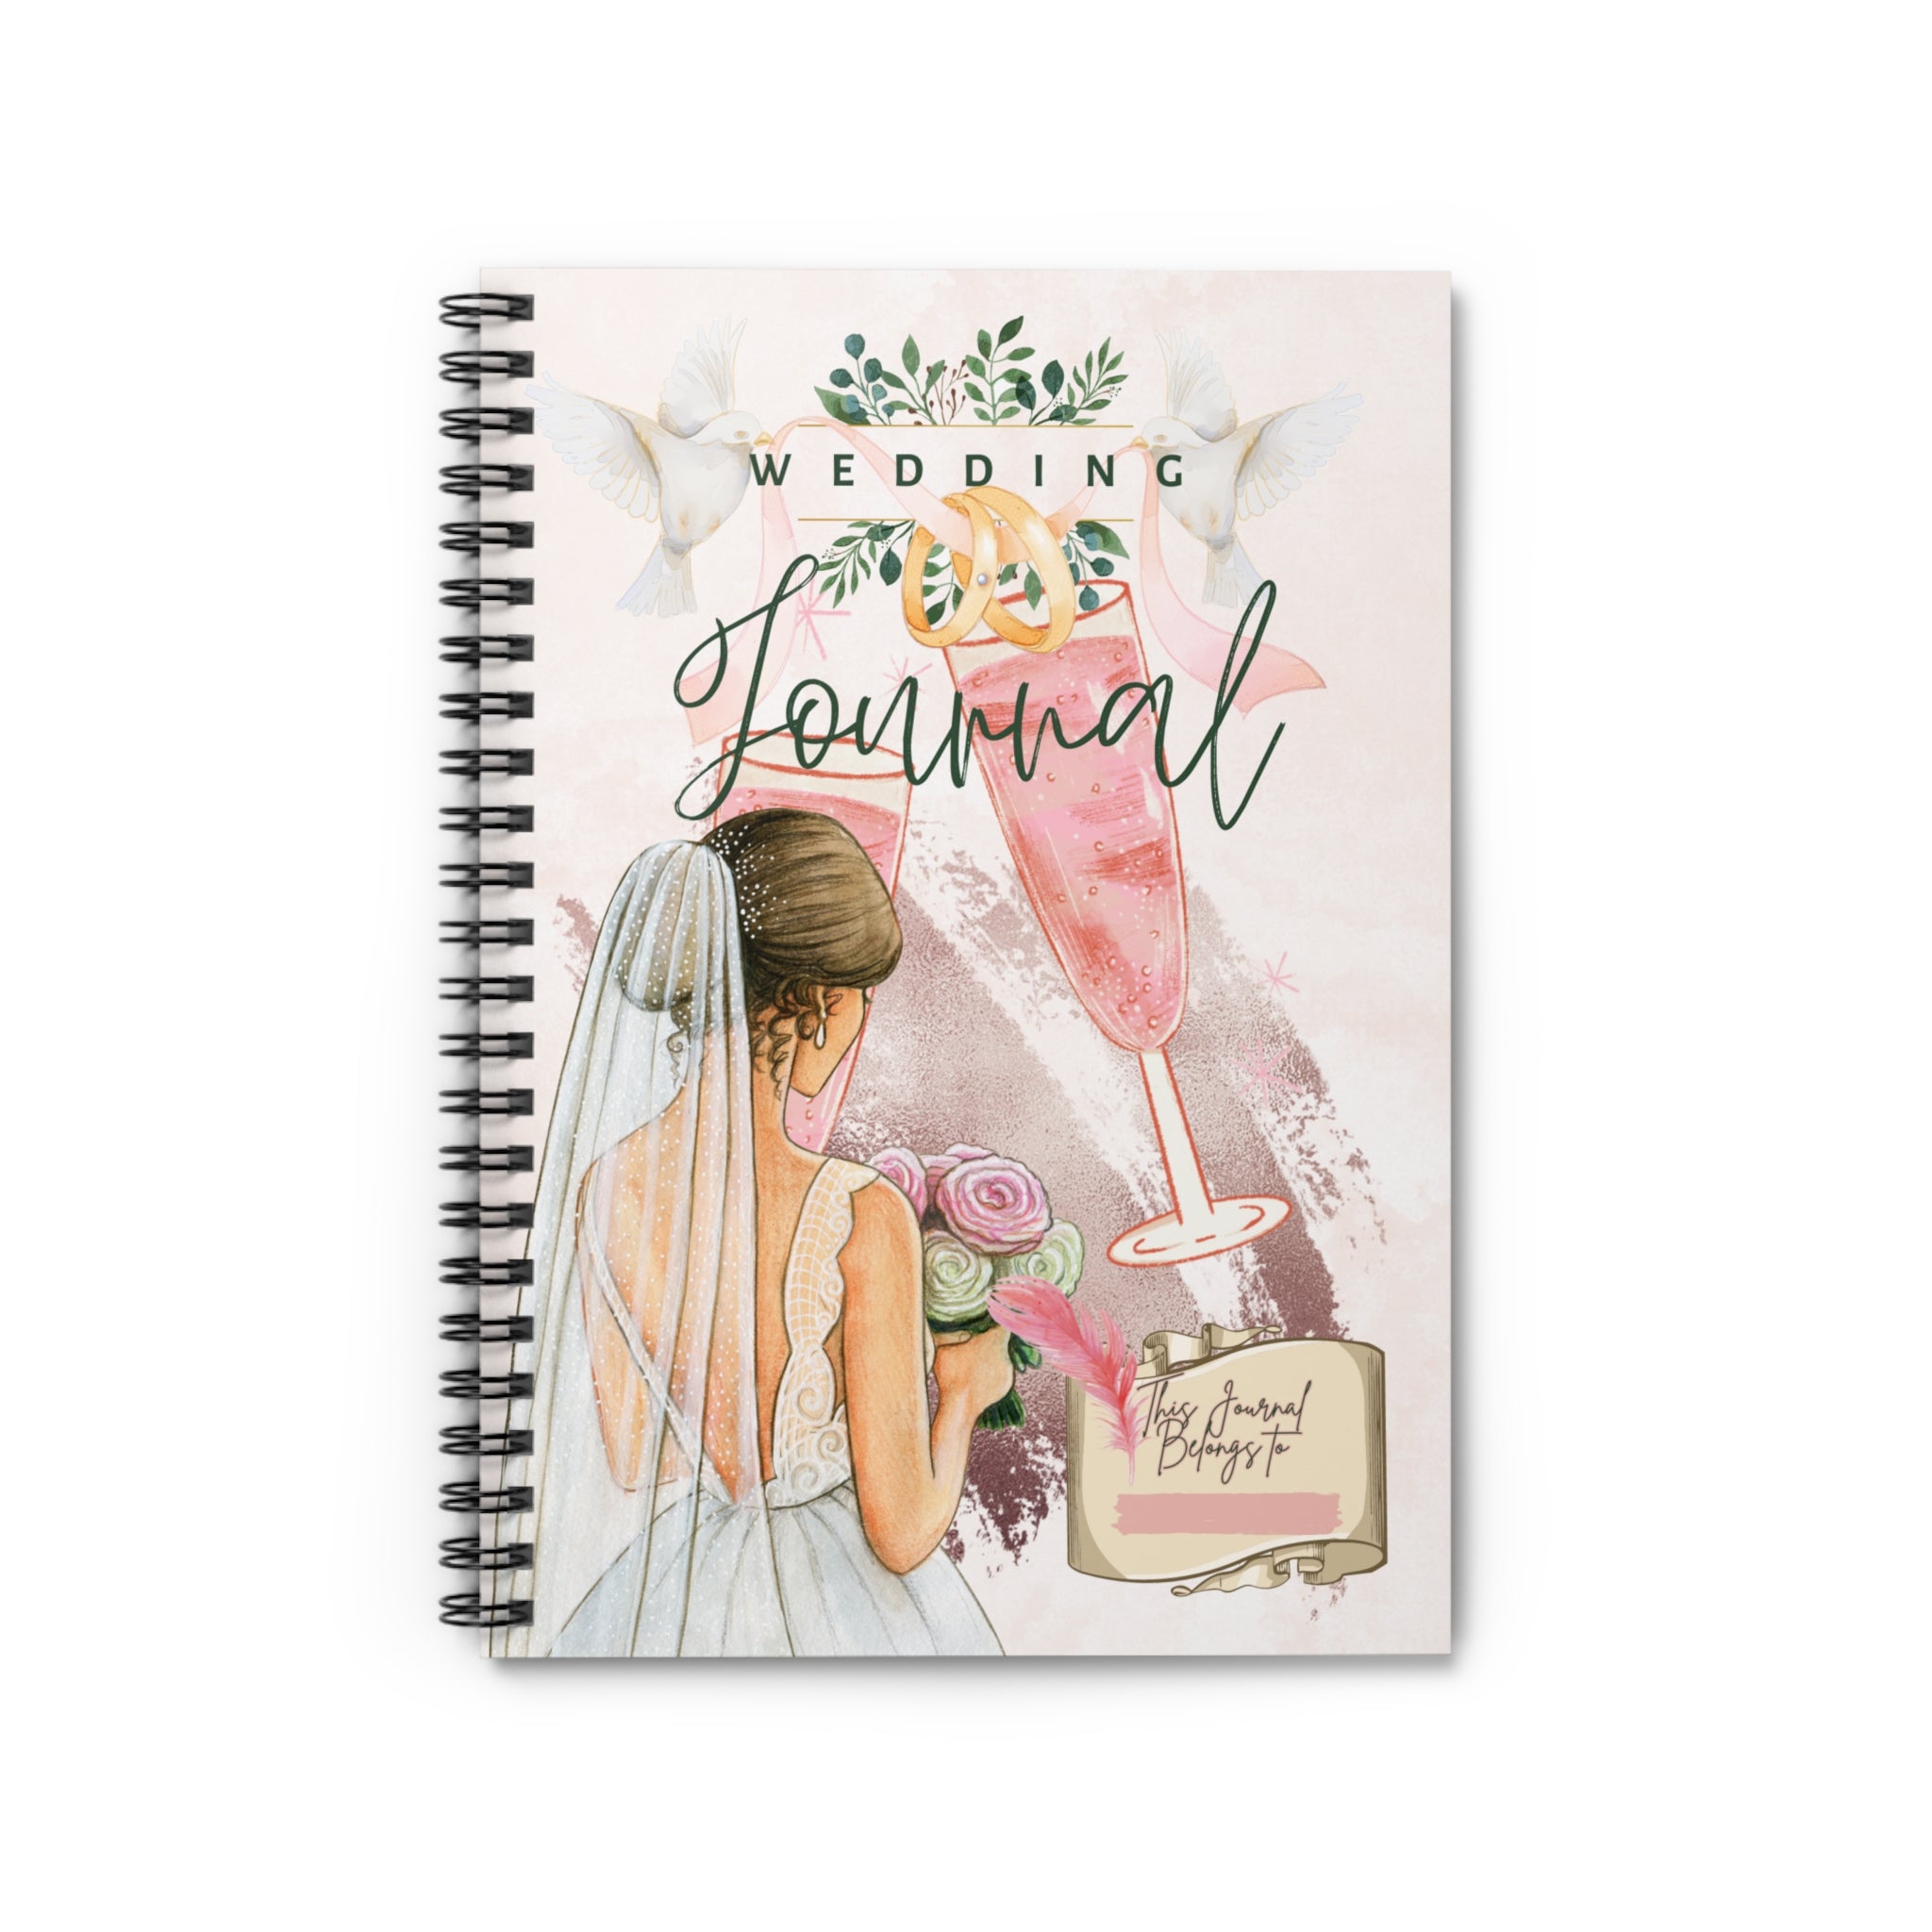 Wedding Journal Spiral Notebook - Ruled Line Paper products Krazy Heart Designs Boutique   